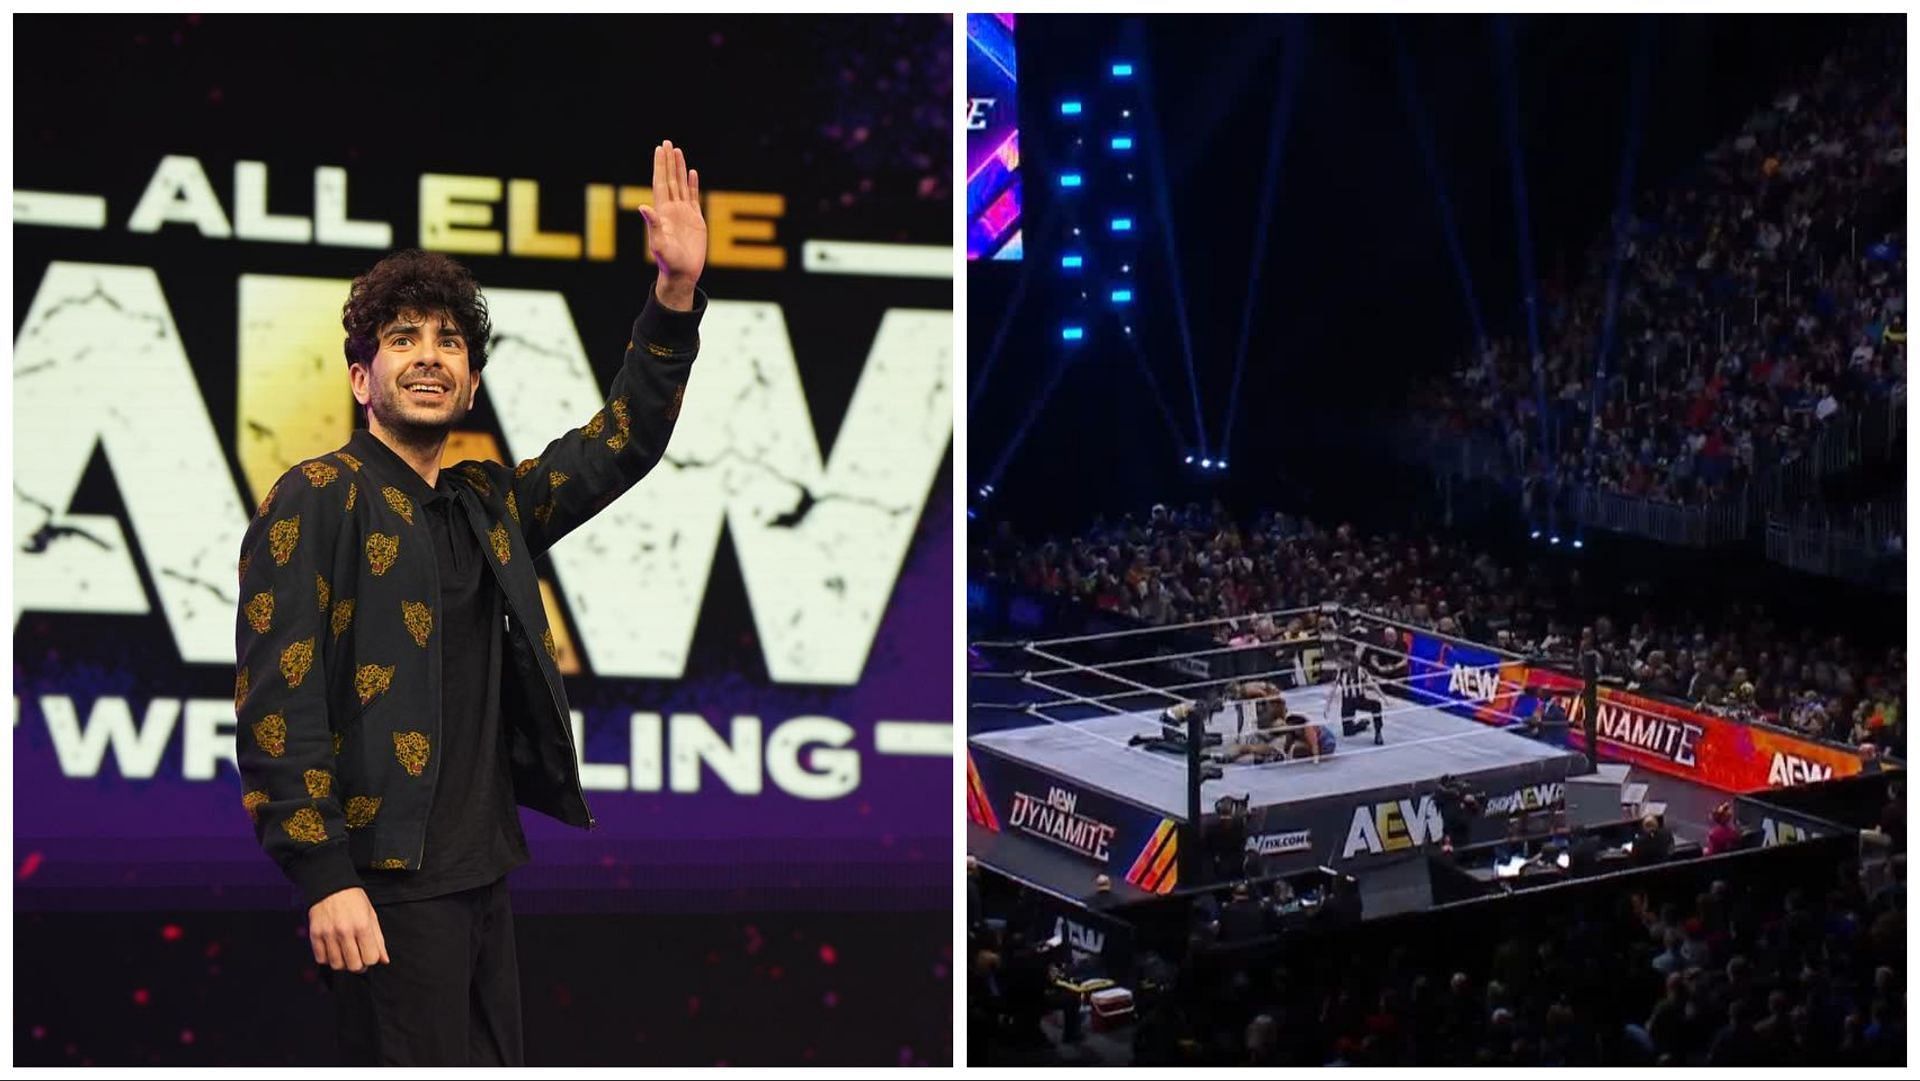 AEW President Tony Khan waves, fans pack local arena for AEW Dynamite